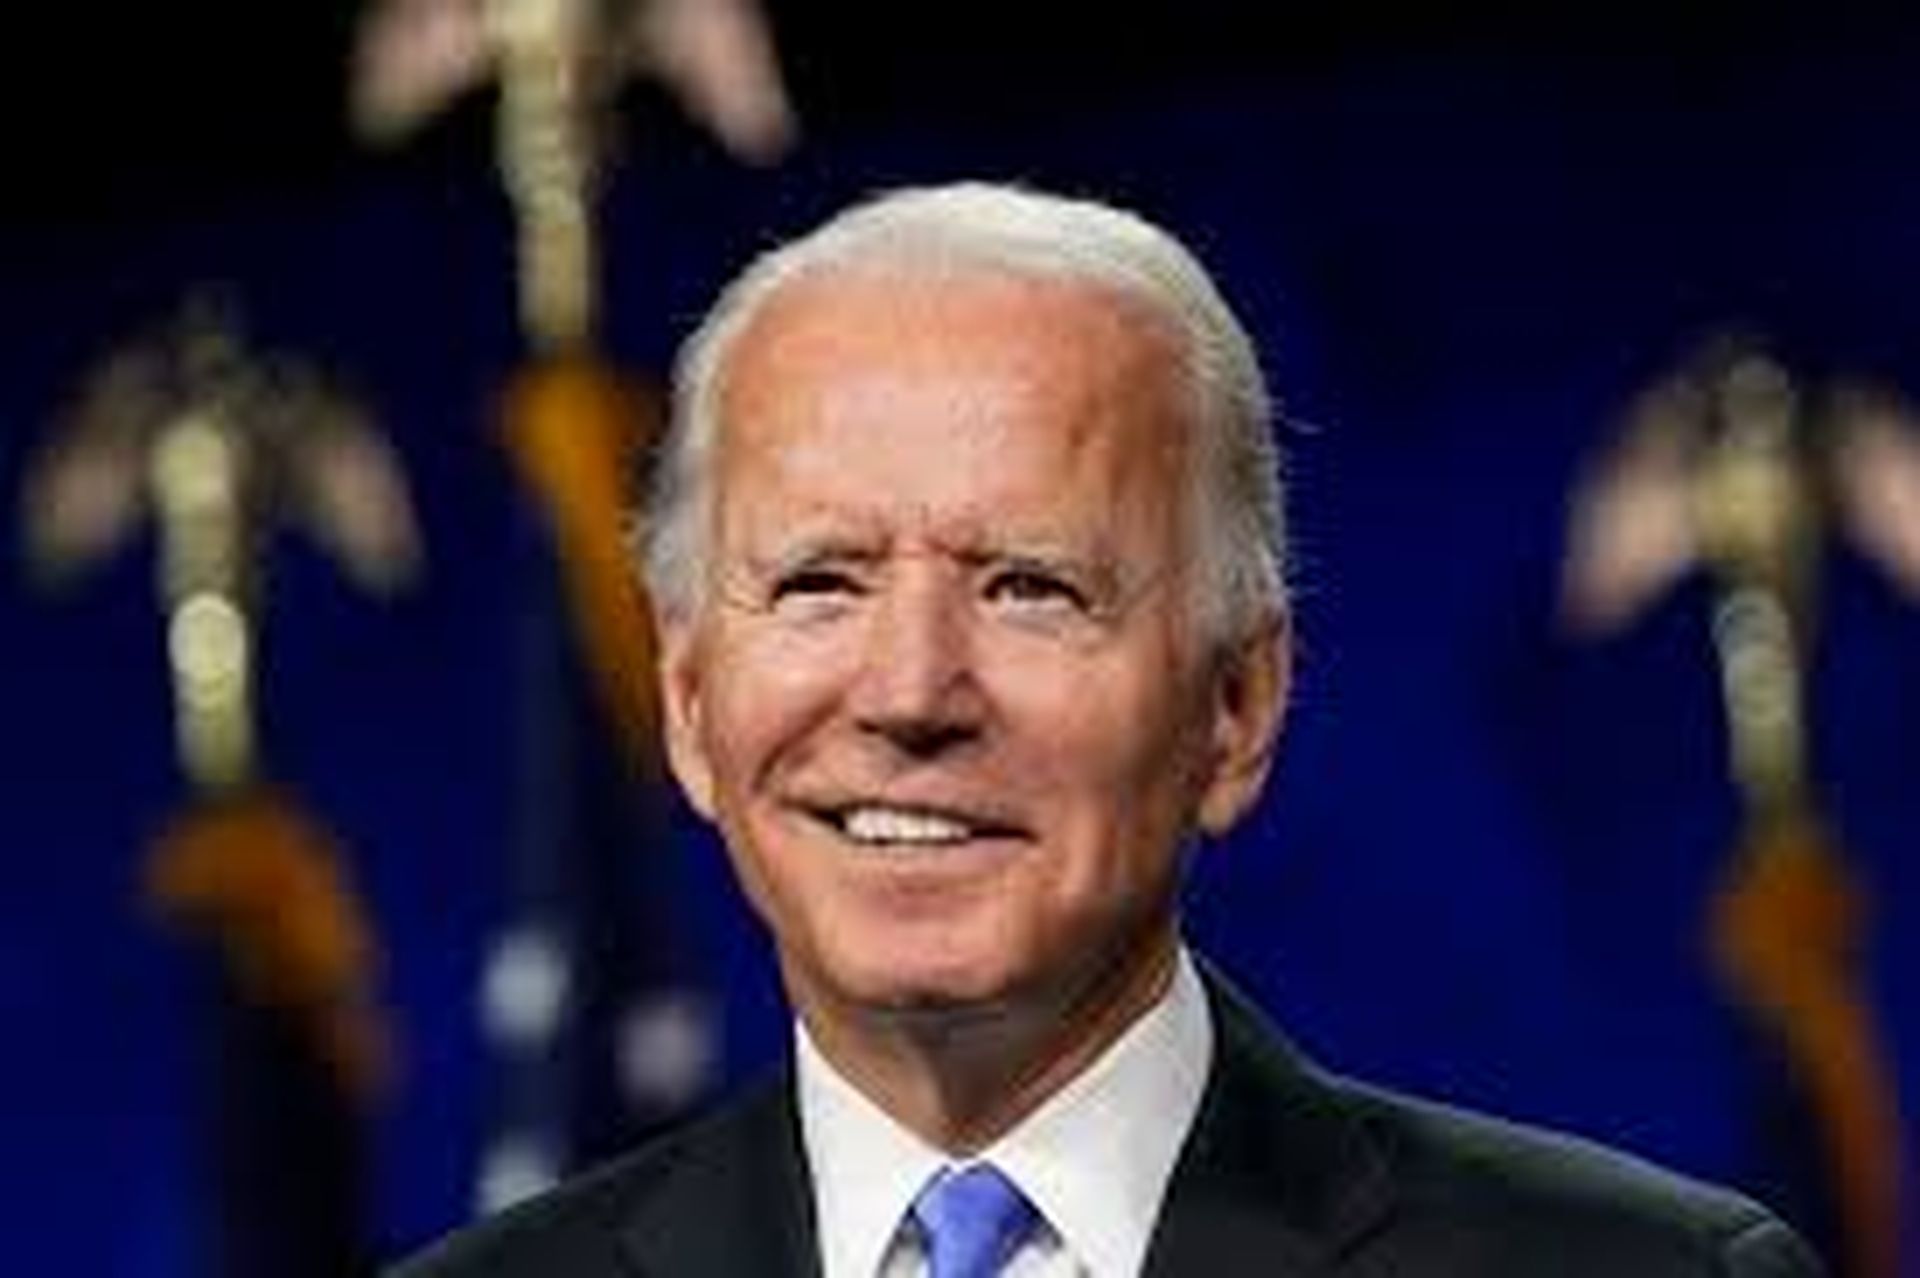 Presidential Candidate Joe Biden to take COVID-19 test today.